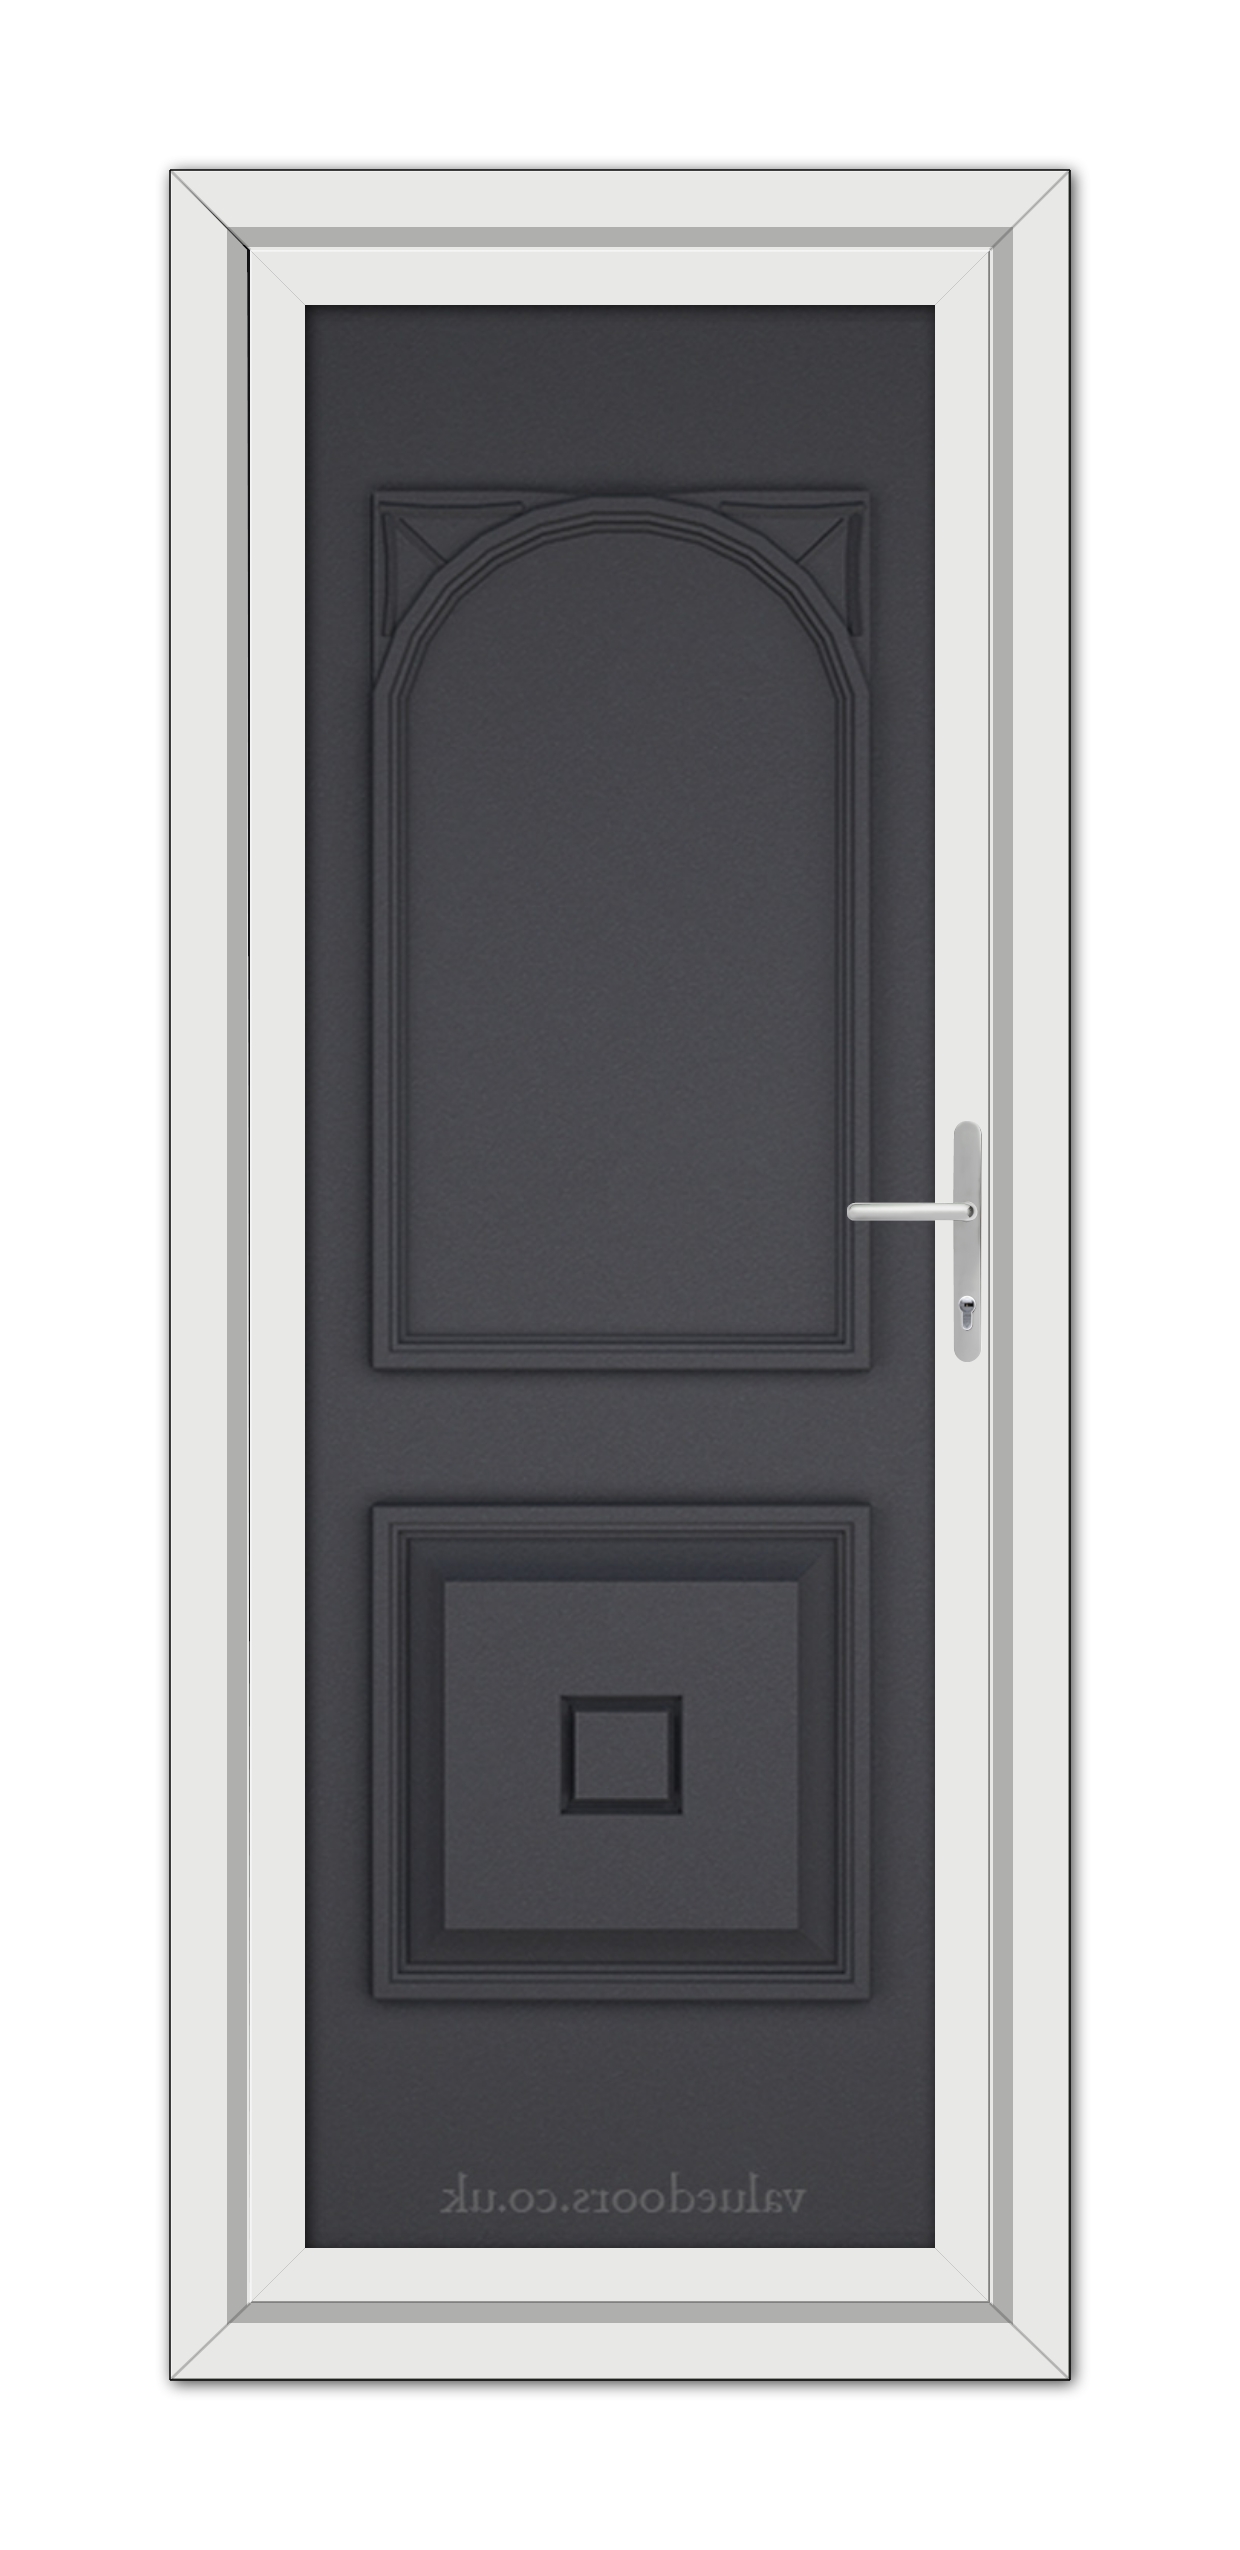 A vertical image of a Grey Grained Reims Solid uPVC Door with a rectangular and arched design, featuring a silver handle, set in a white frame.